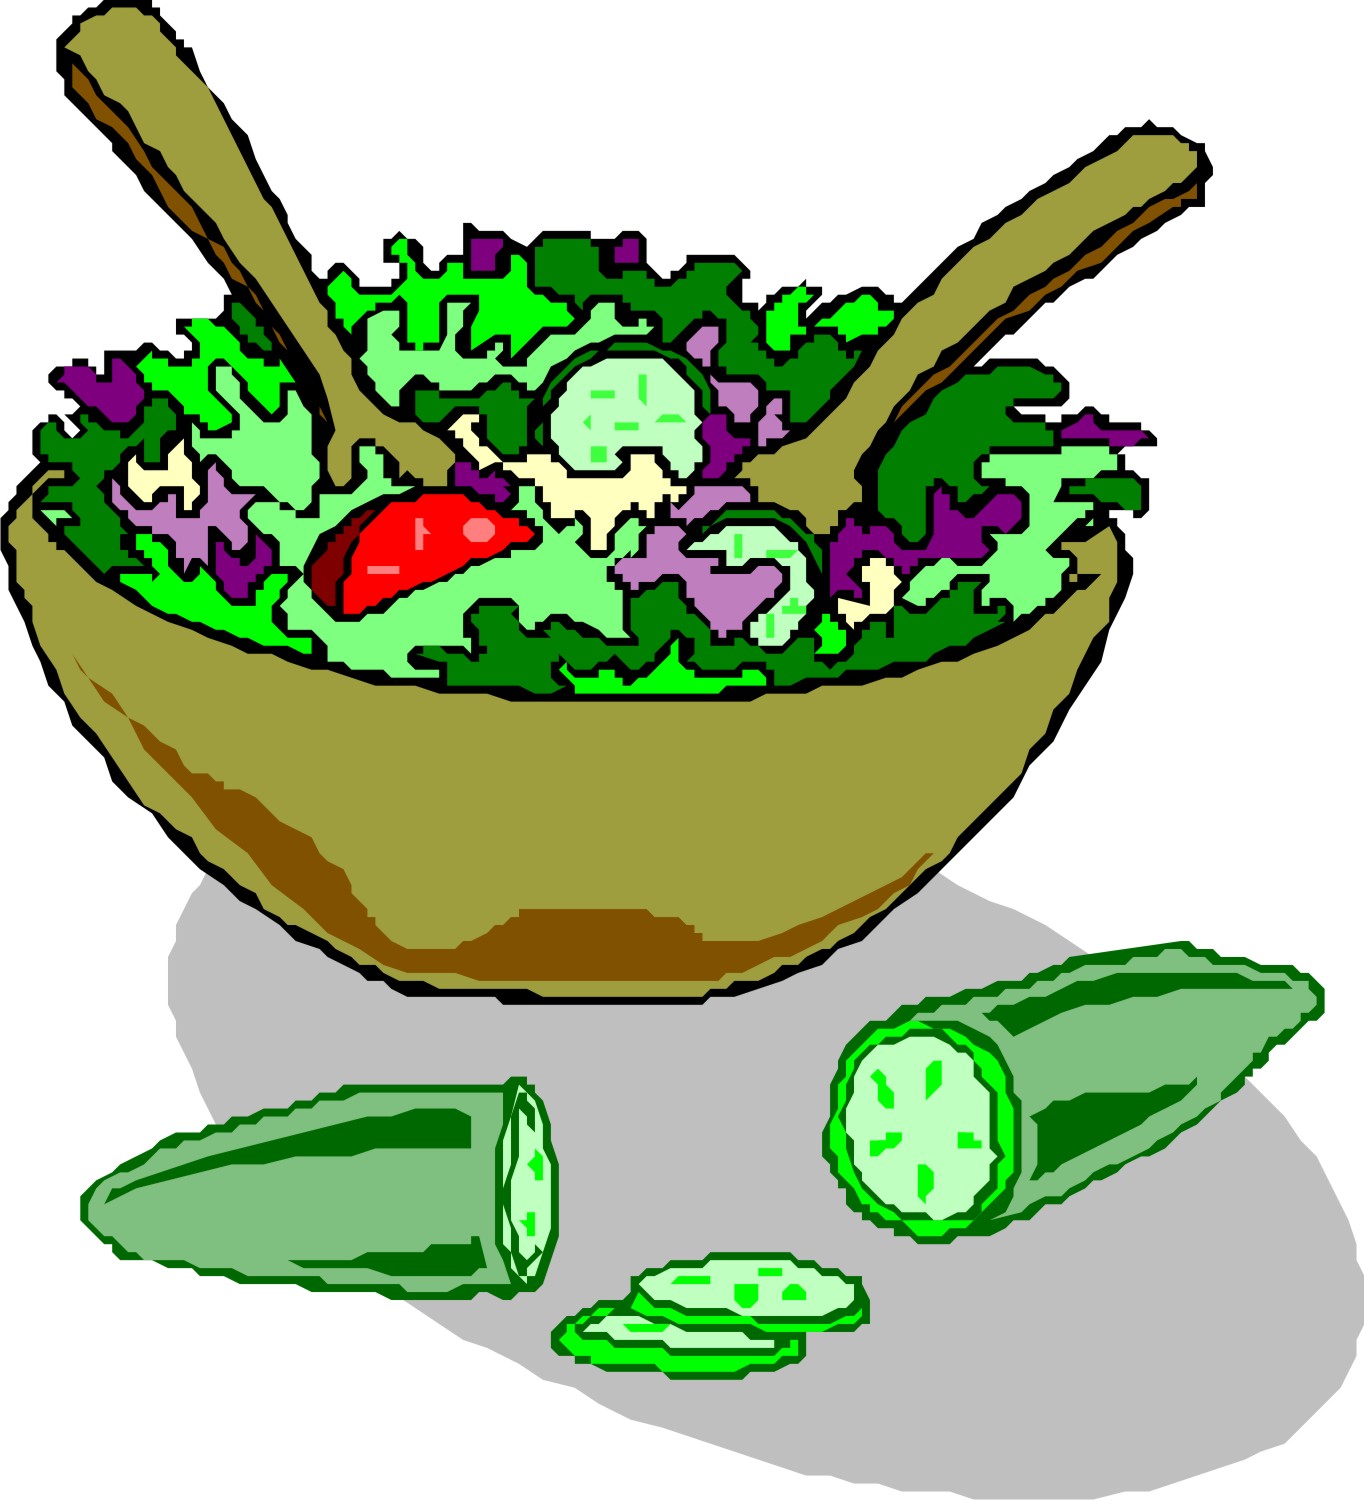 Salad Clip Art Black And White   Clipart Panda   Free Clipart Images